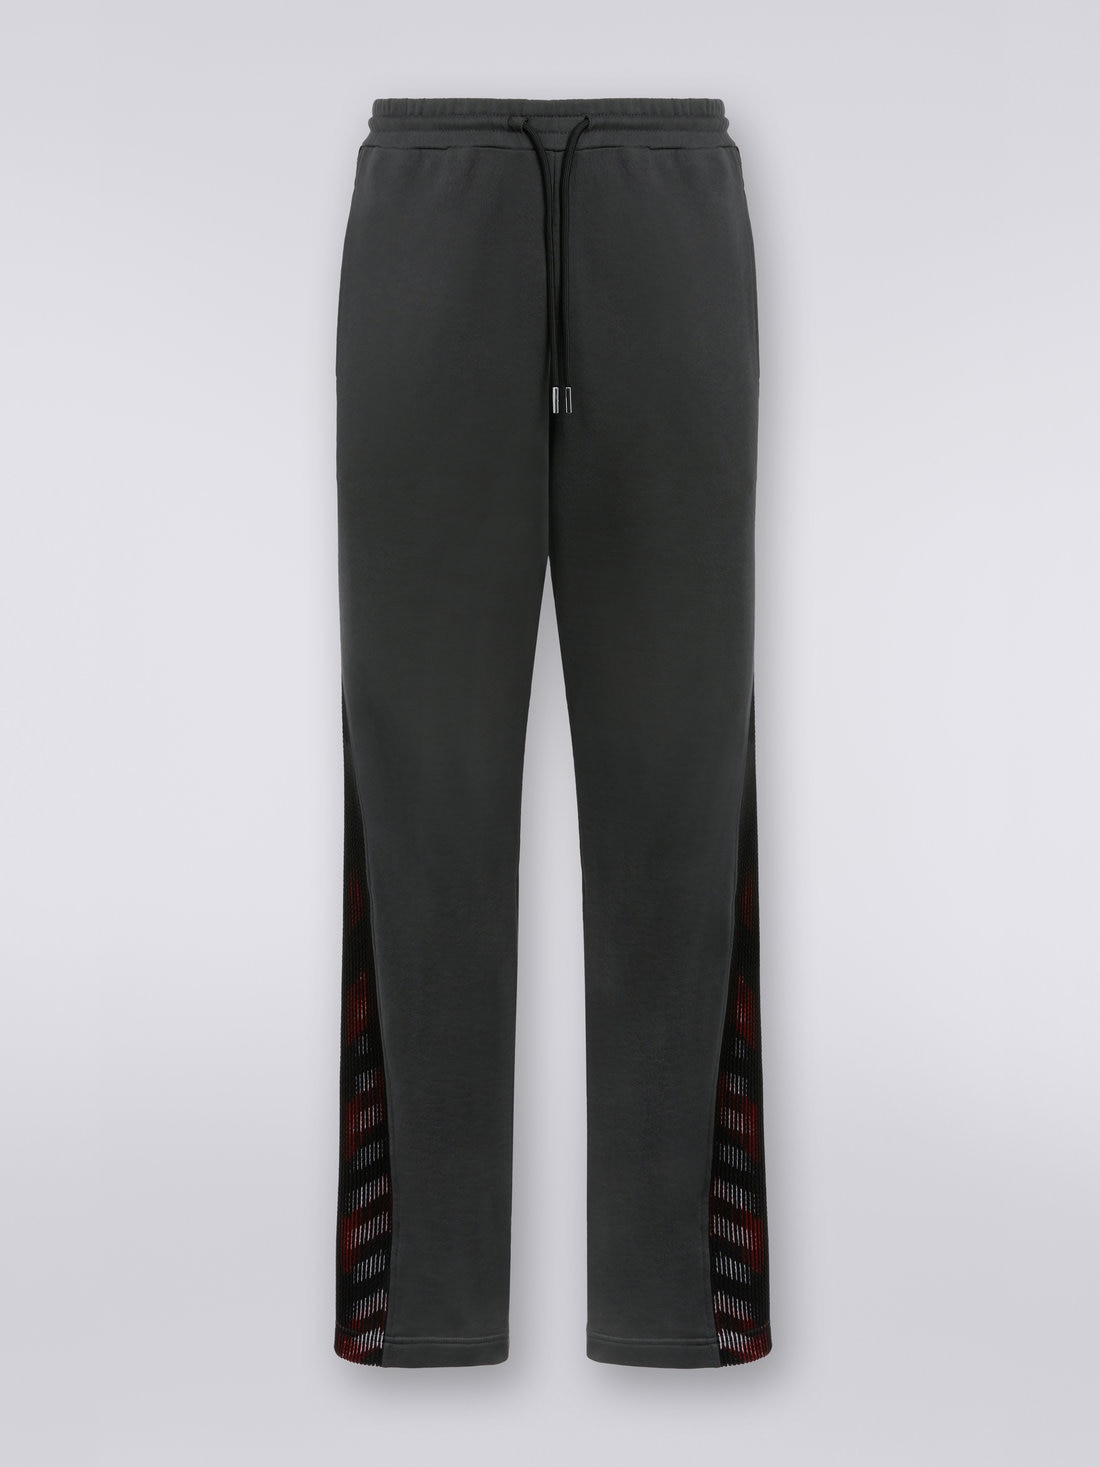 Cotton sports trousers with knitted insert in collaboration with Mike Maignan, Grey - 0